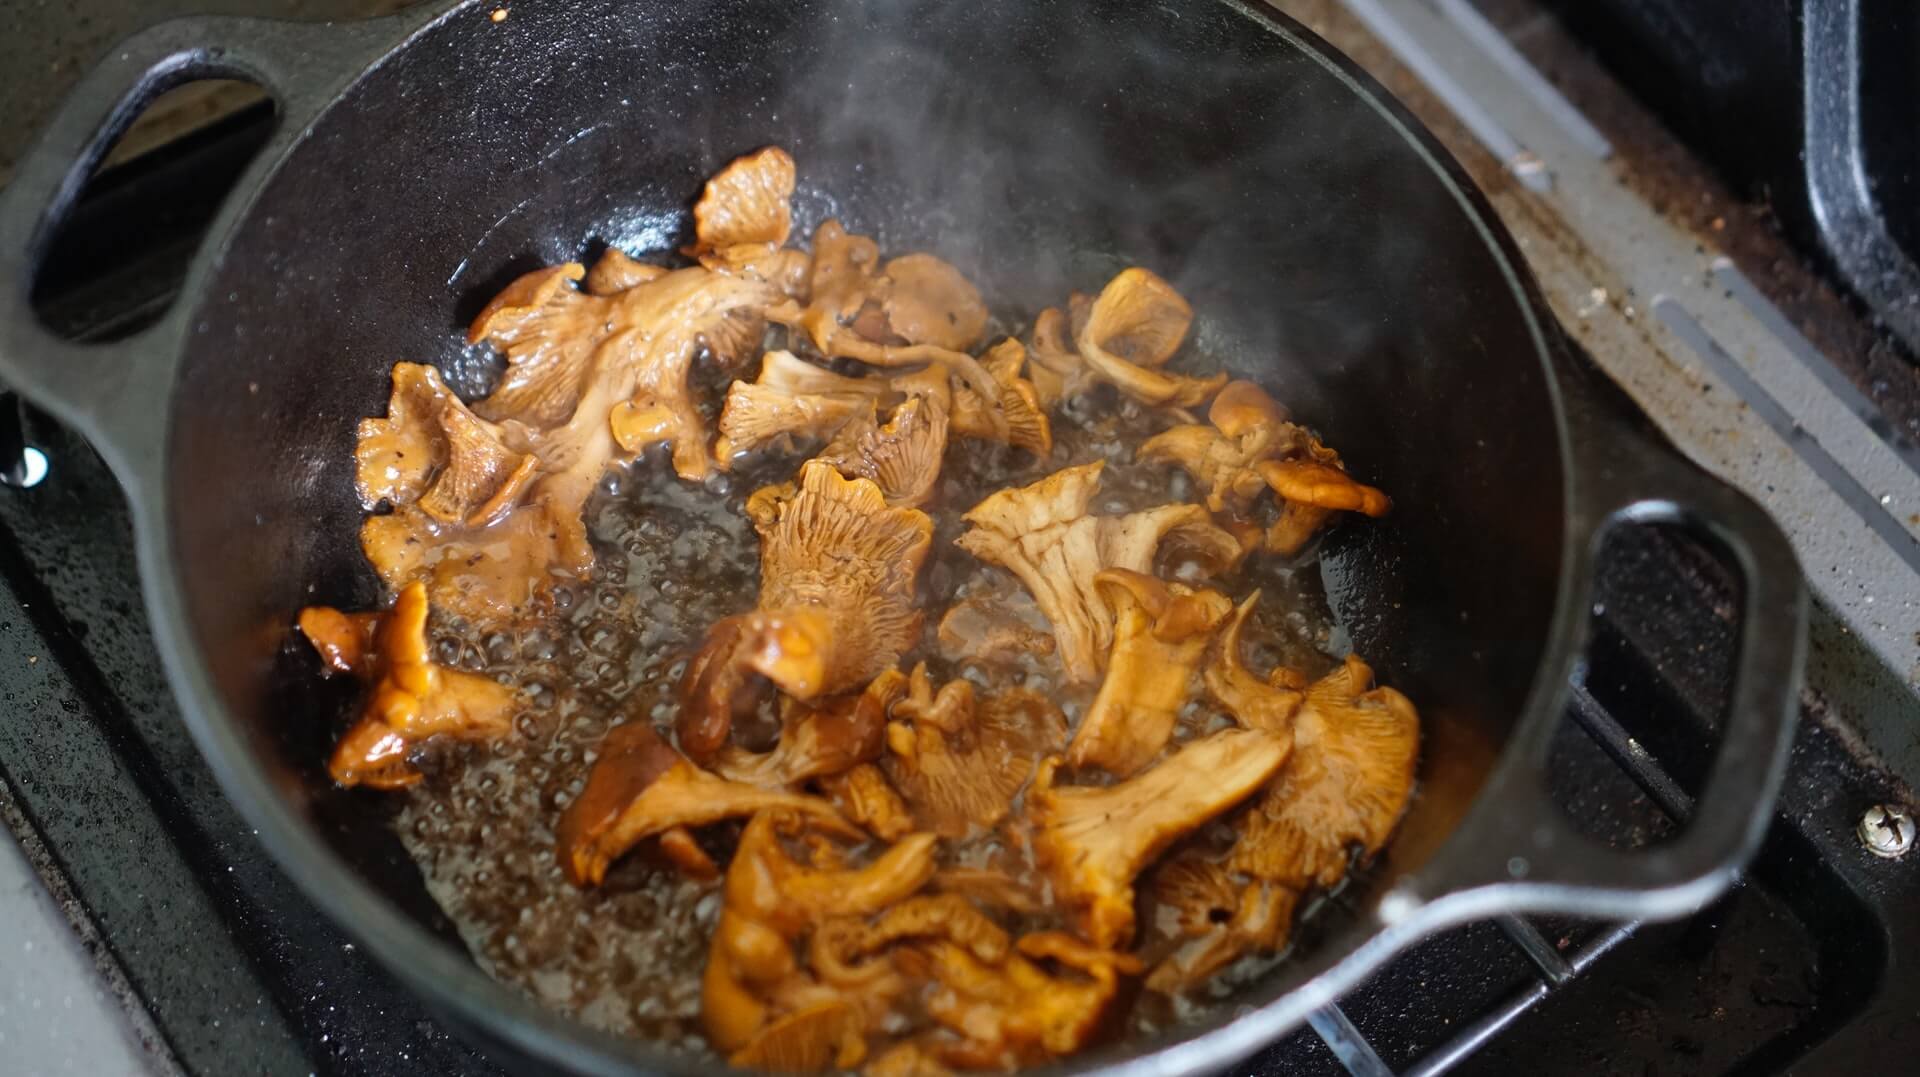 A hot pan full of oil and golden chanterelle mushrooms.